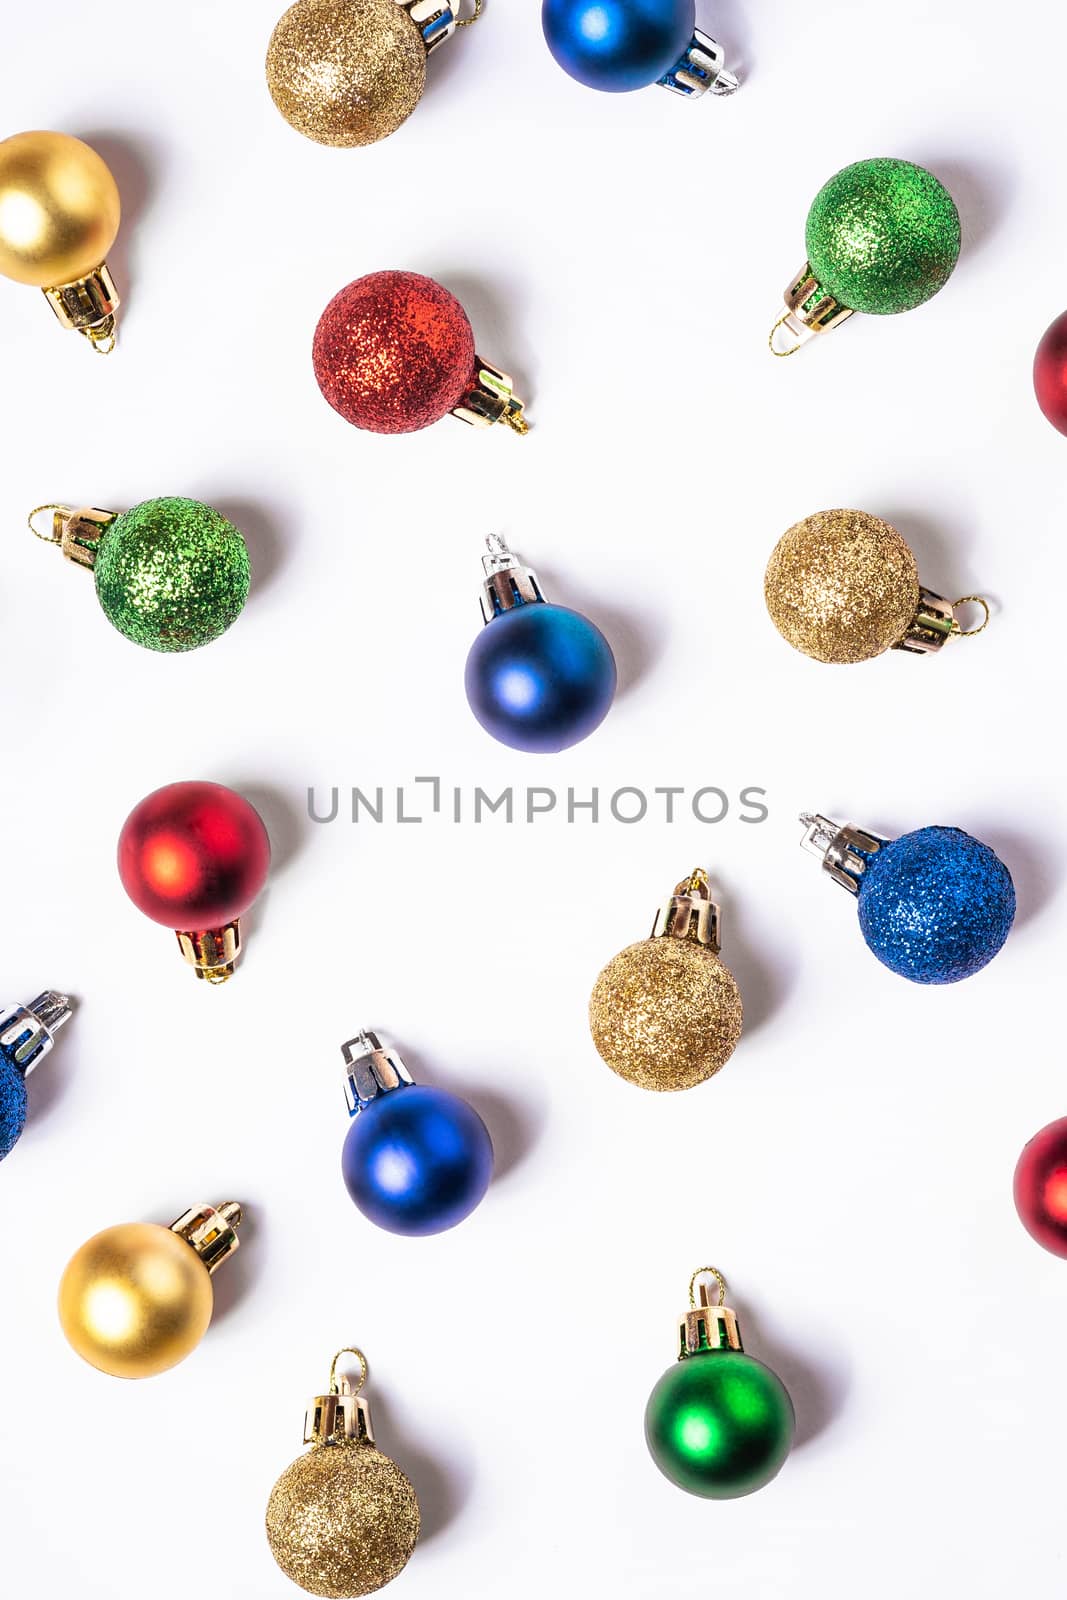 Christmas composition with colorful balls and ornaments decorations on white background